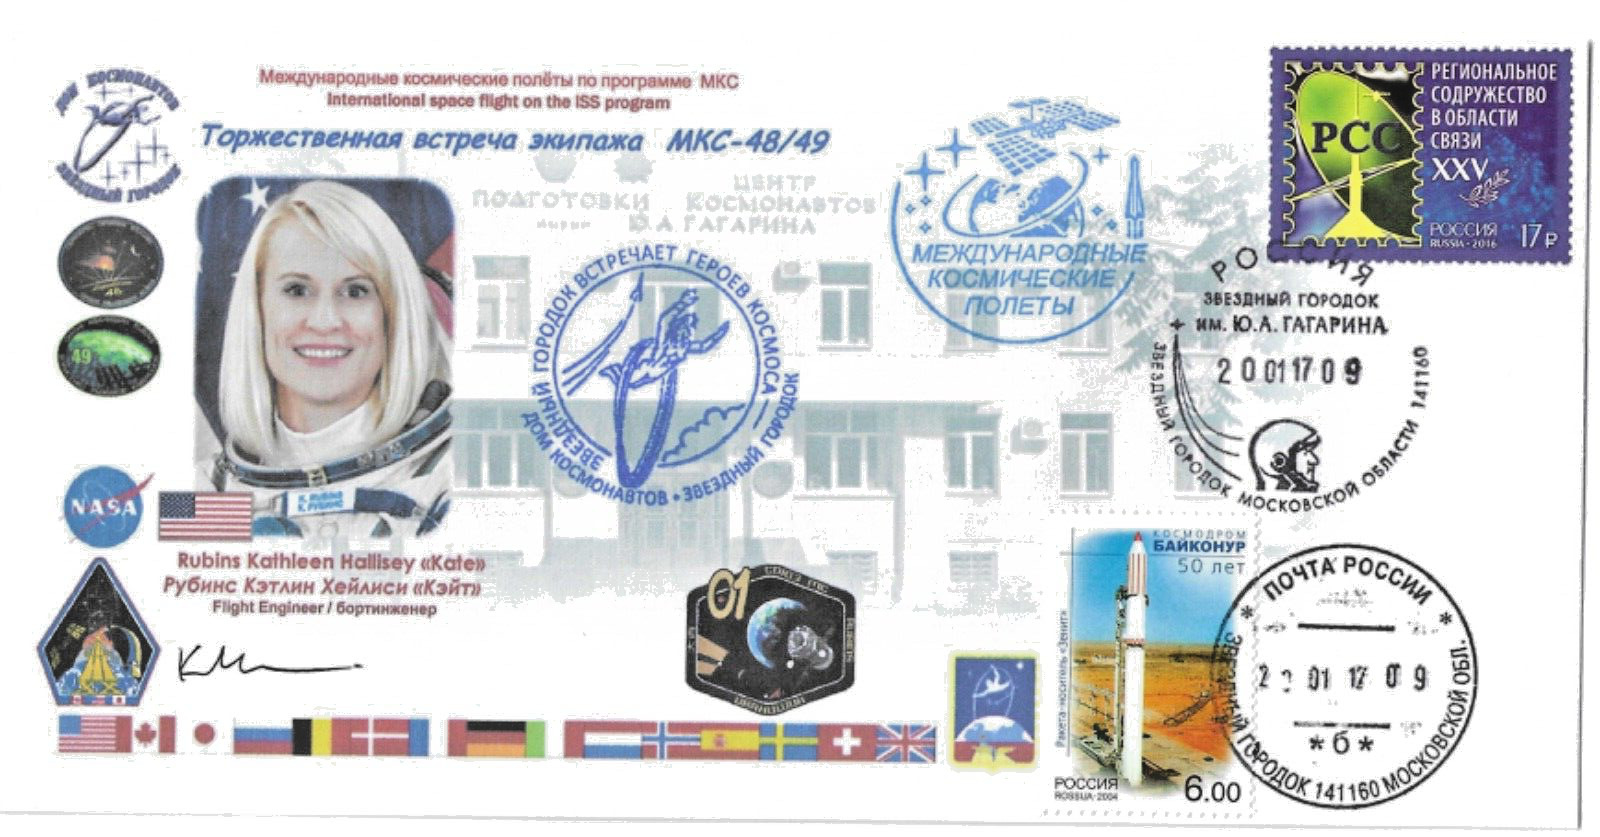 NASA ASTRONAUT RUBINS ISS EXPEDITION 63 64 SOYUZ MS-17 SIGNED SPACE COVER